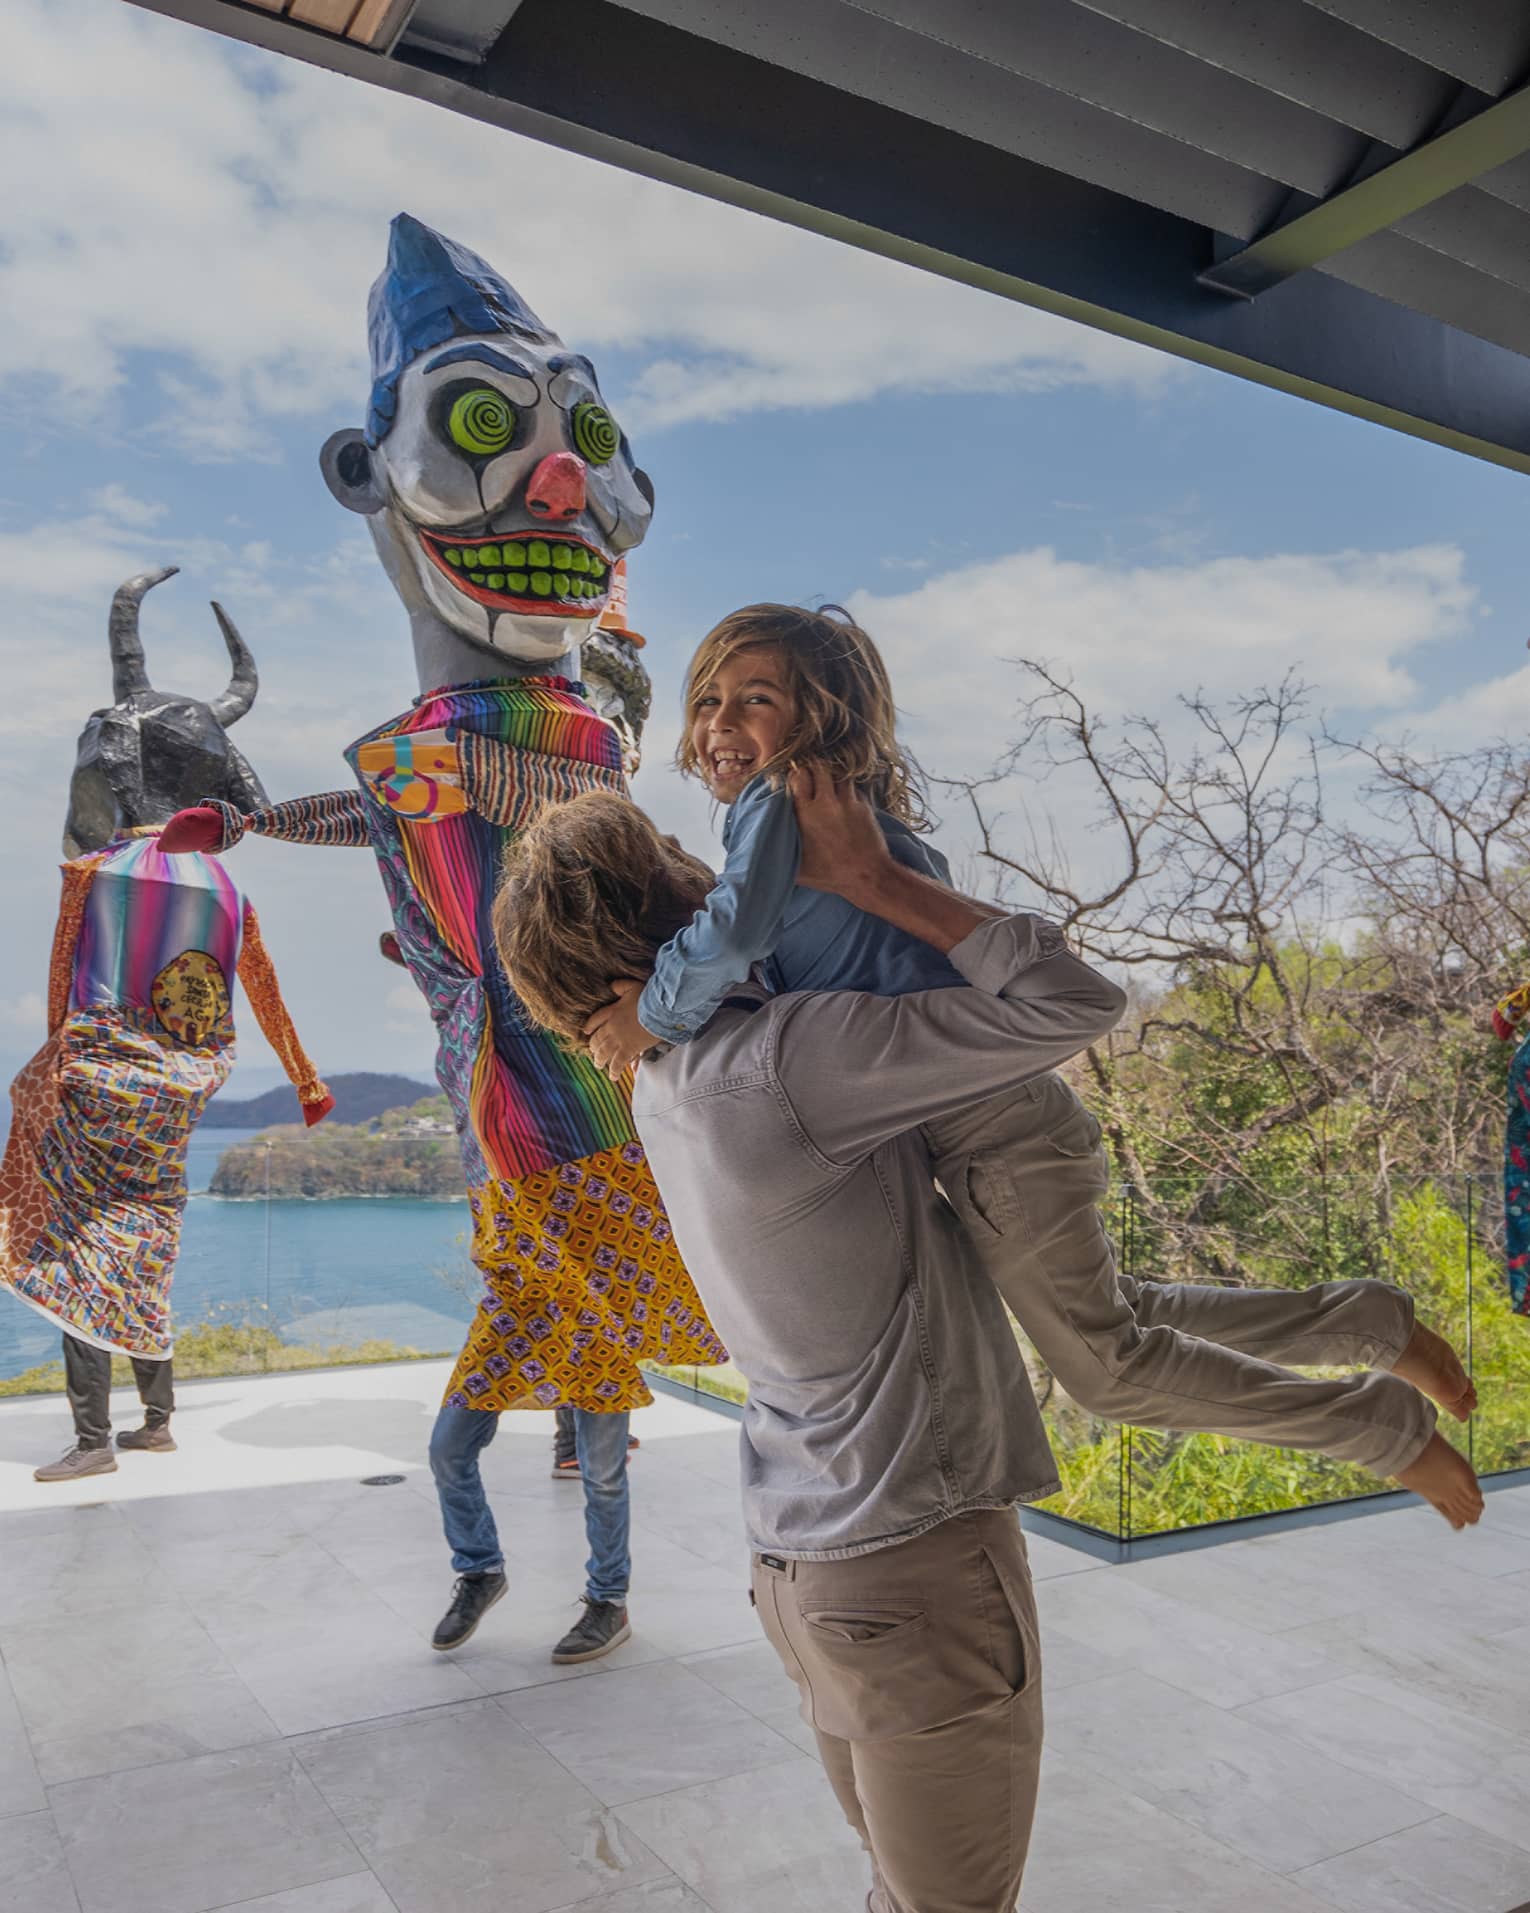 A young boy with blond curly hair is lifted up into the arms of his father as three people dressed in traditional Mexican costumes dance in the background